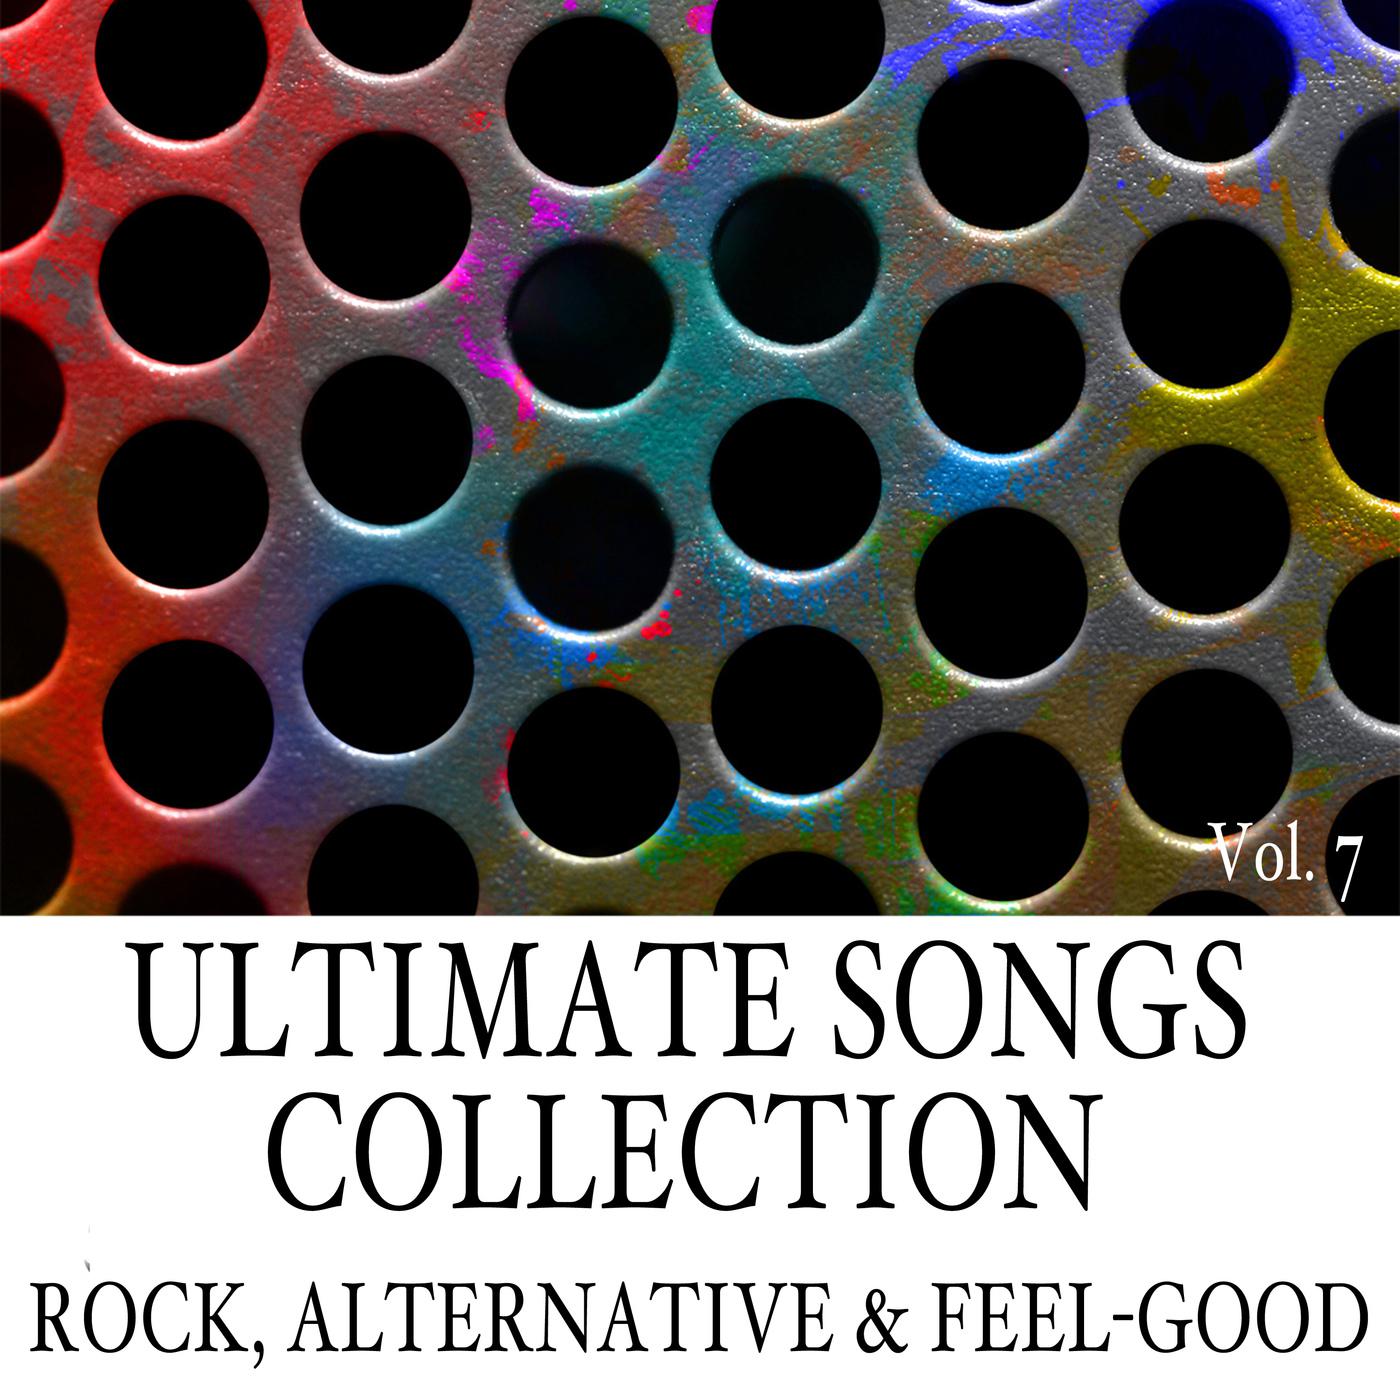 Ultimate Songs Collection, Vol. 7: Rock, Alternative & Feel-Good